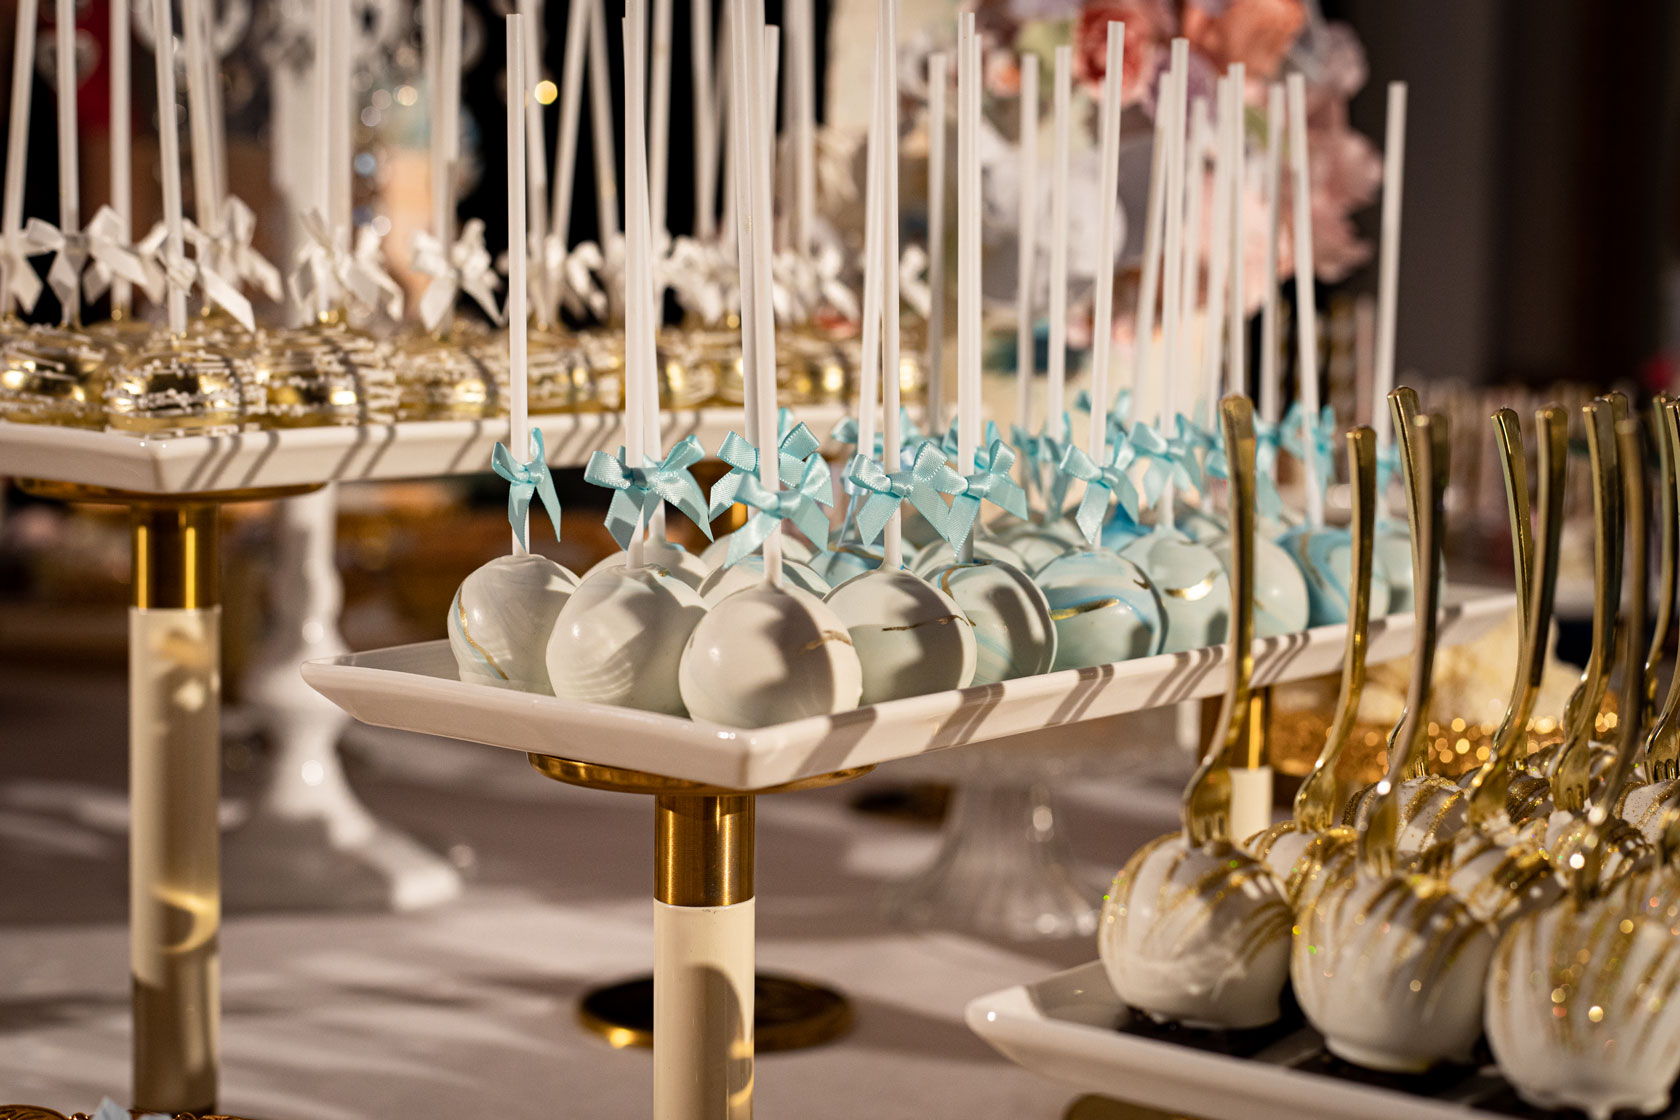 Rows of elegant white and gold cake pops lined up on elegant gold trays